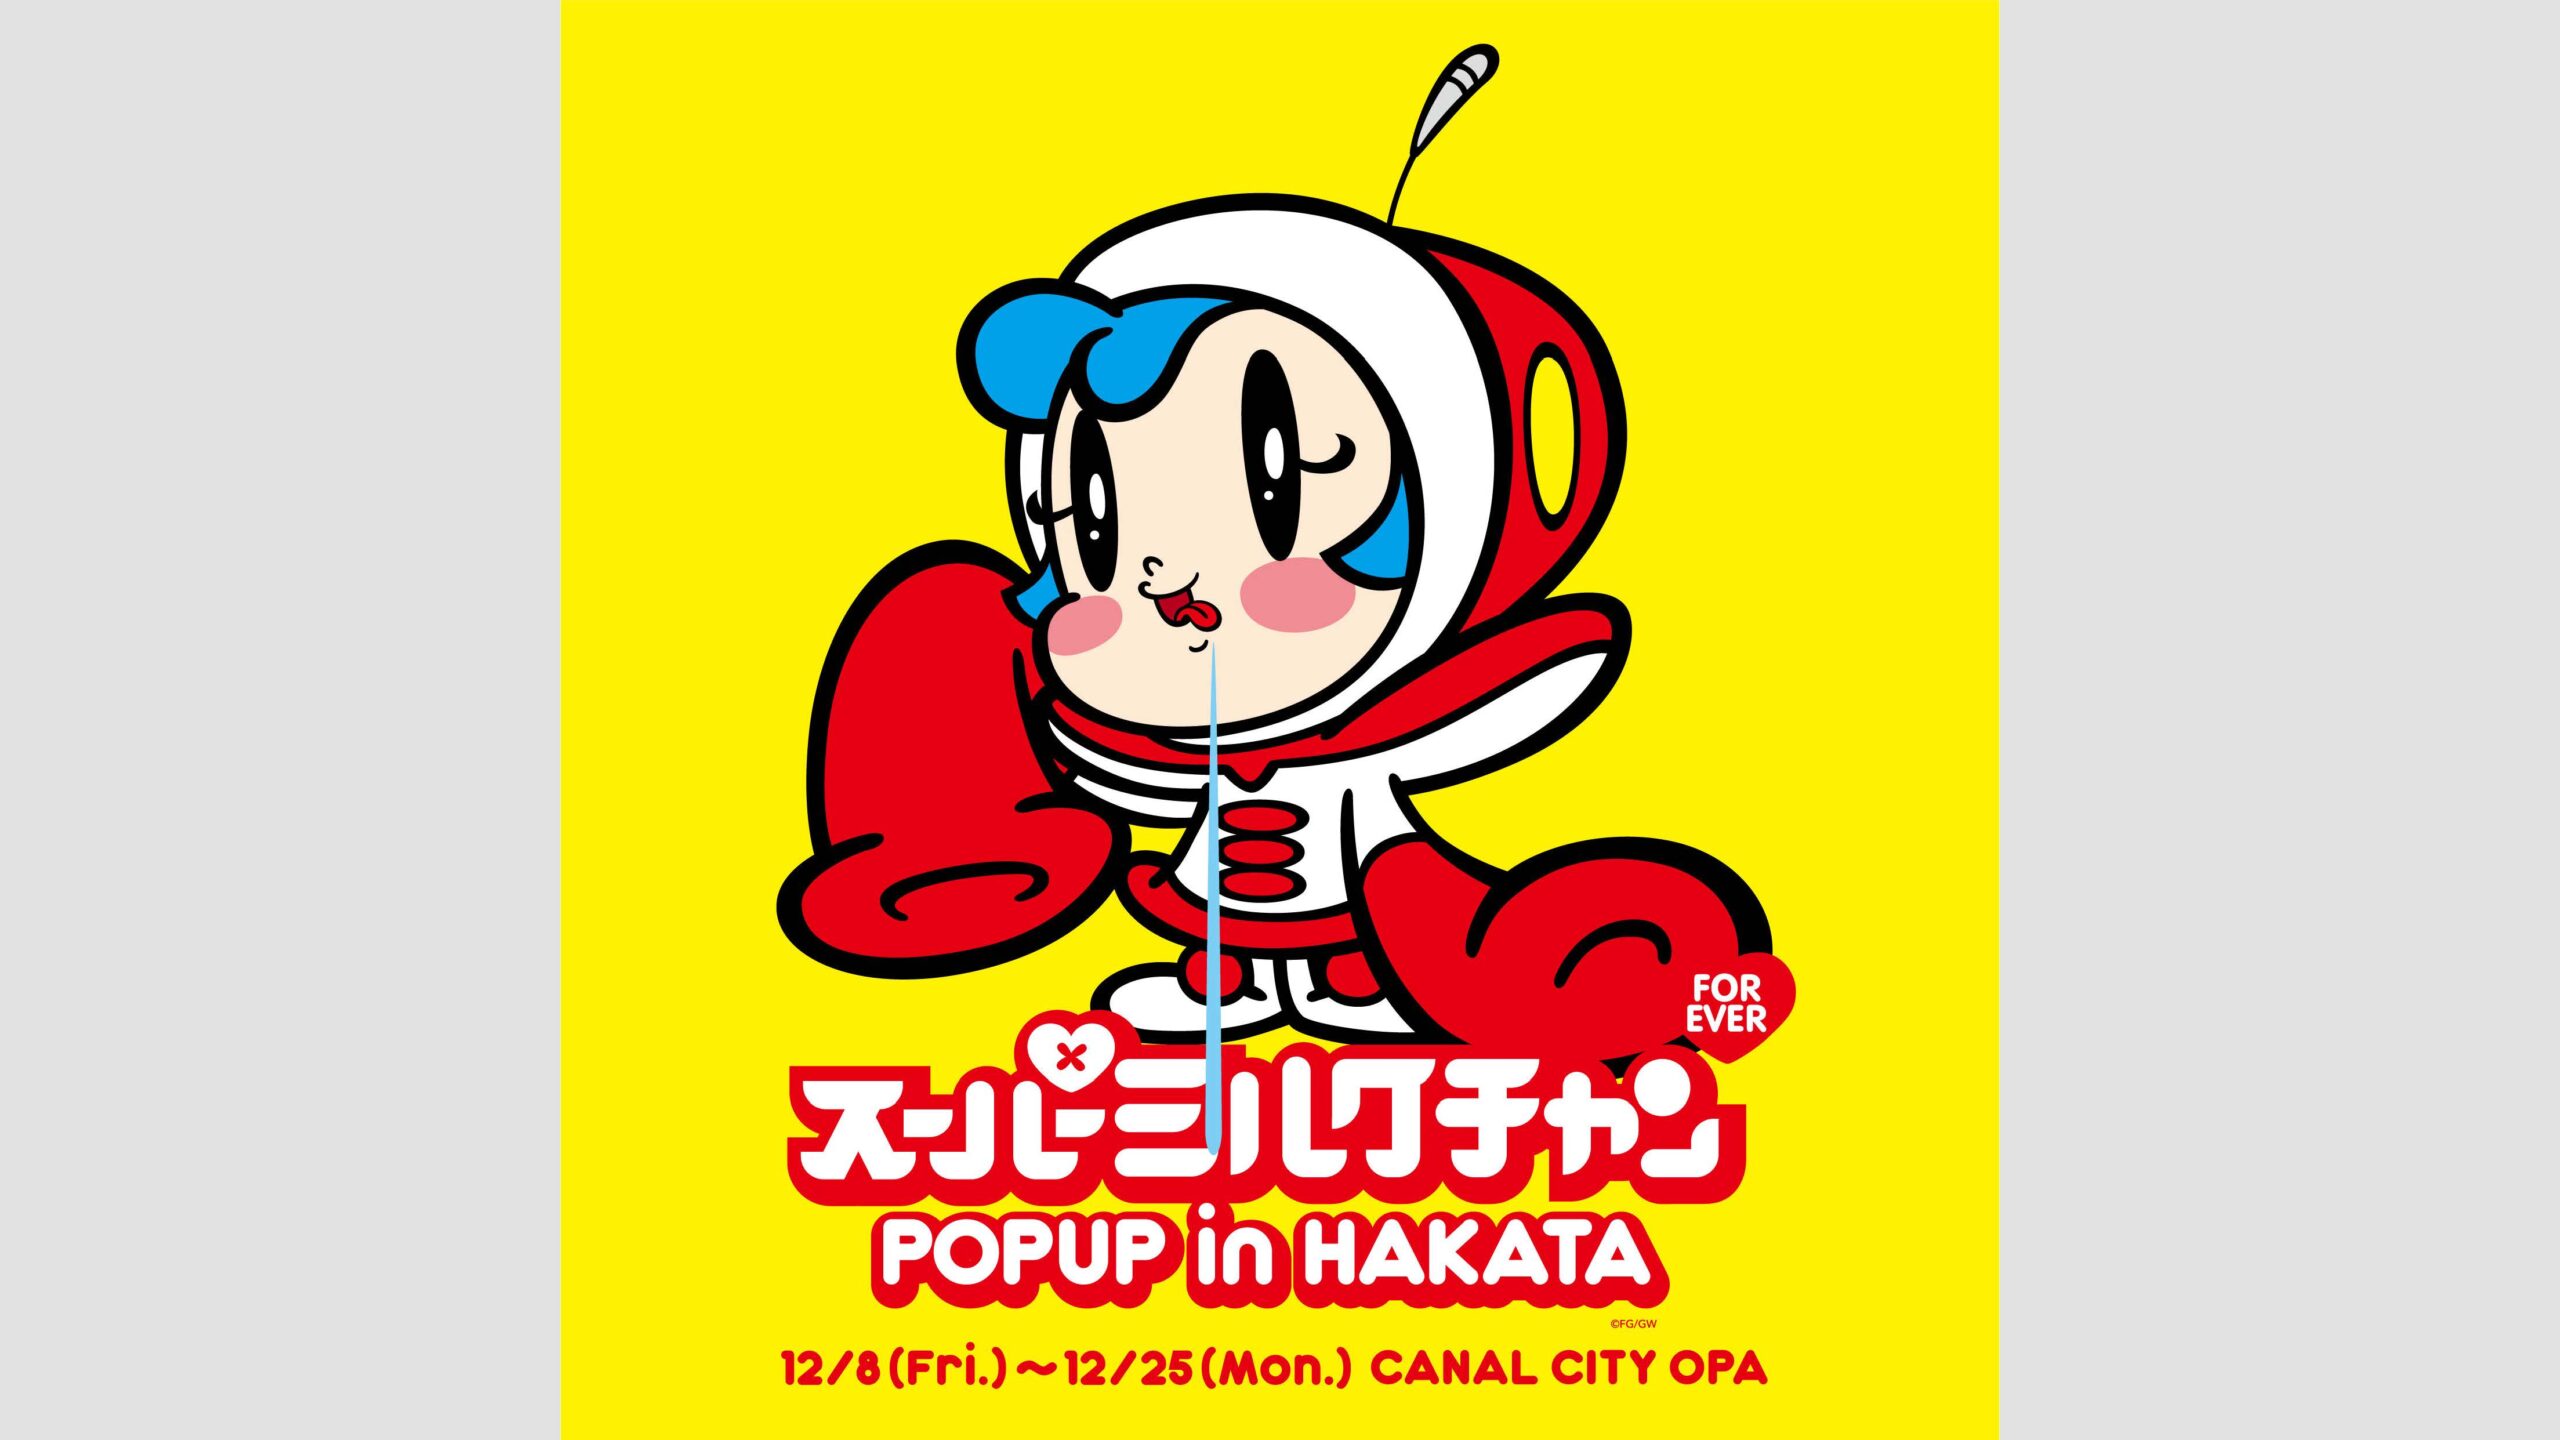 First time in Fukuoka! Pop-up store of Supermilk Chan, ‘Supermilk POP UP STORE in HAKATA’!